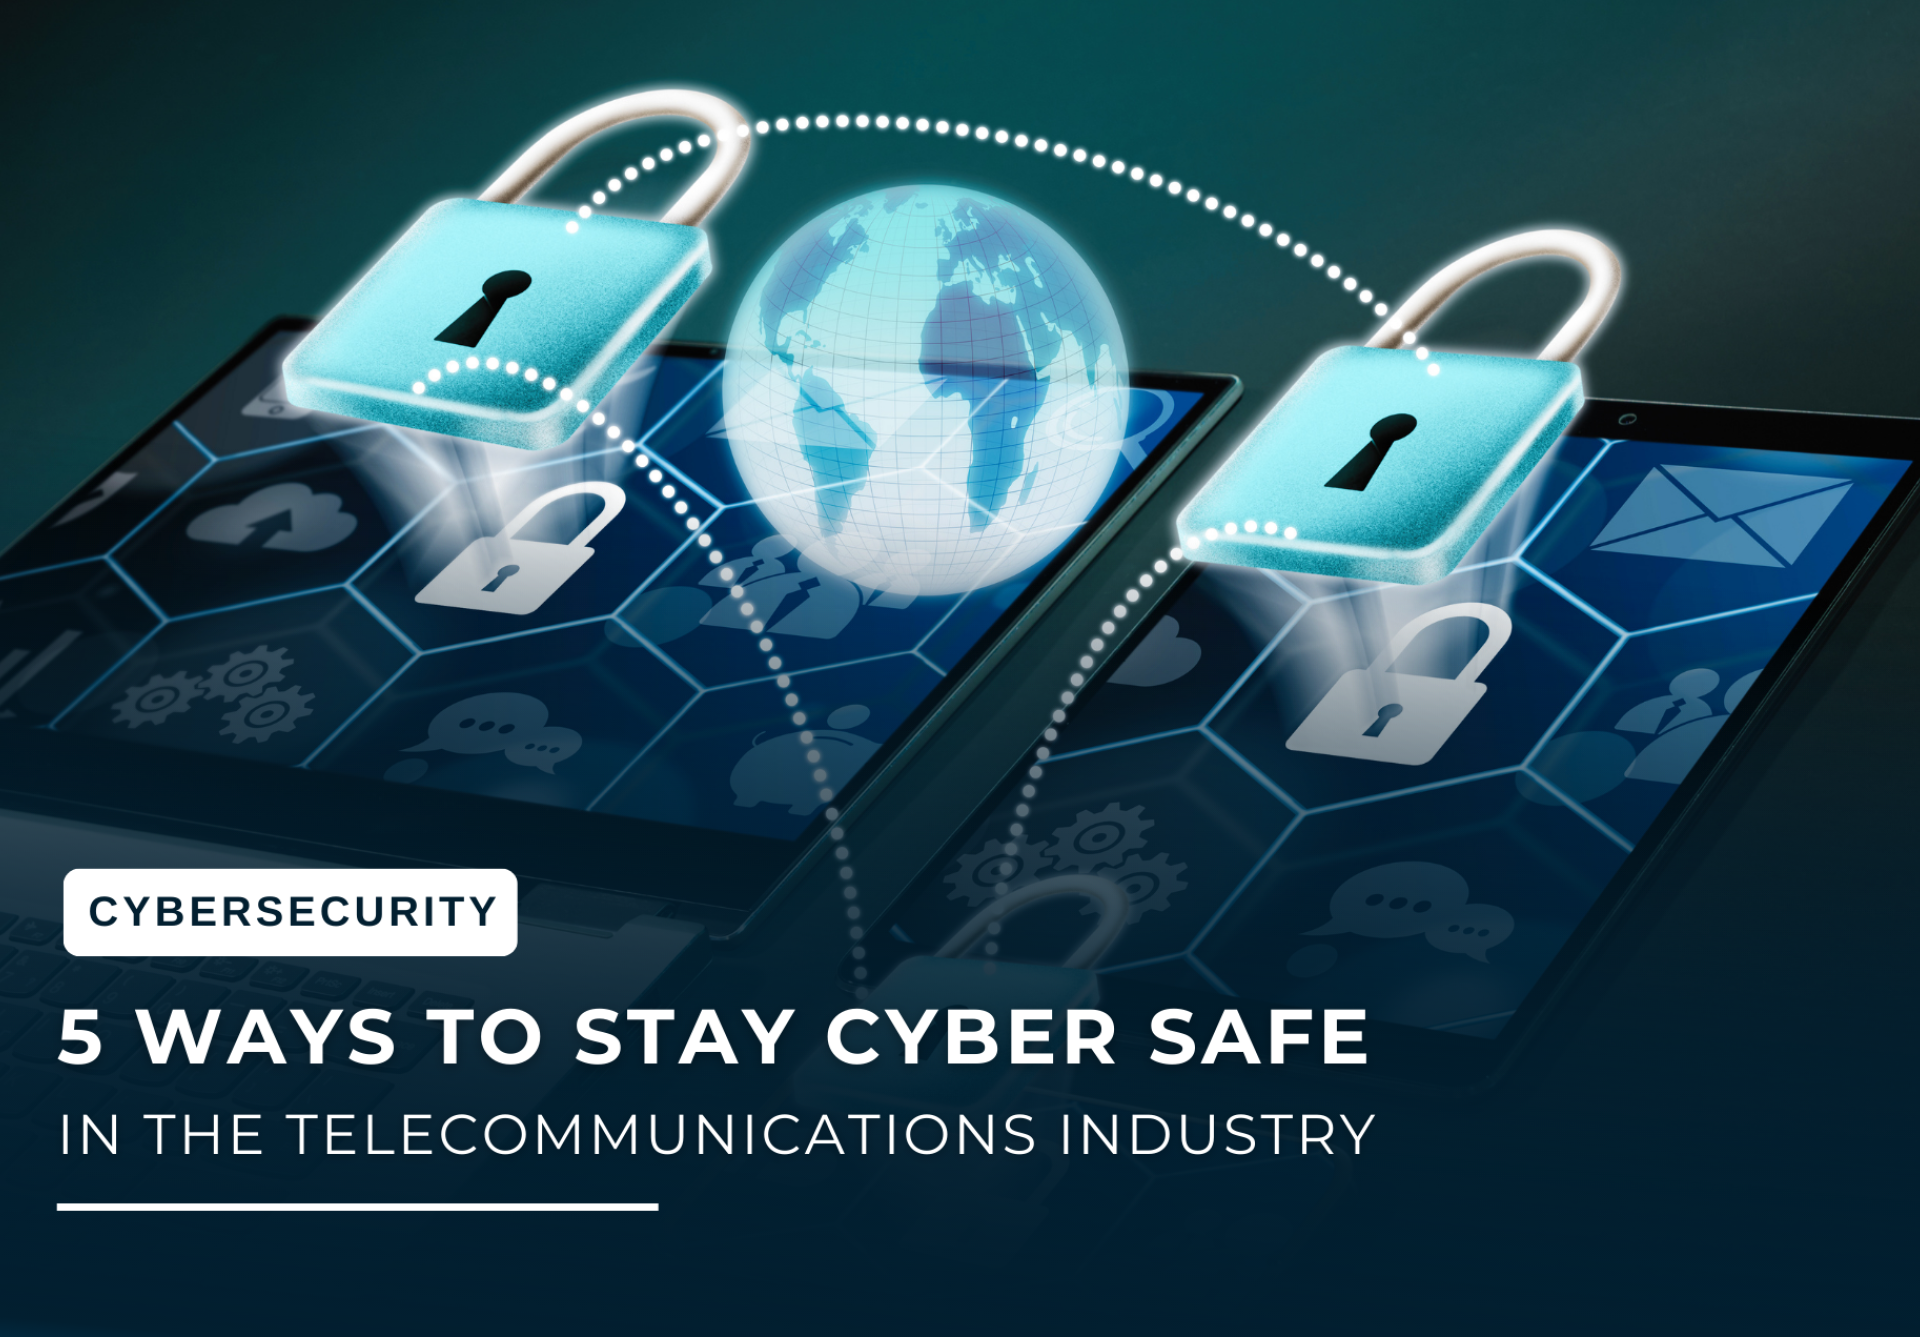 5 Ways to Stay Cyber Safe in the Telecommunications Industry